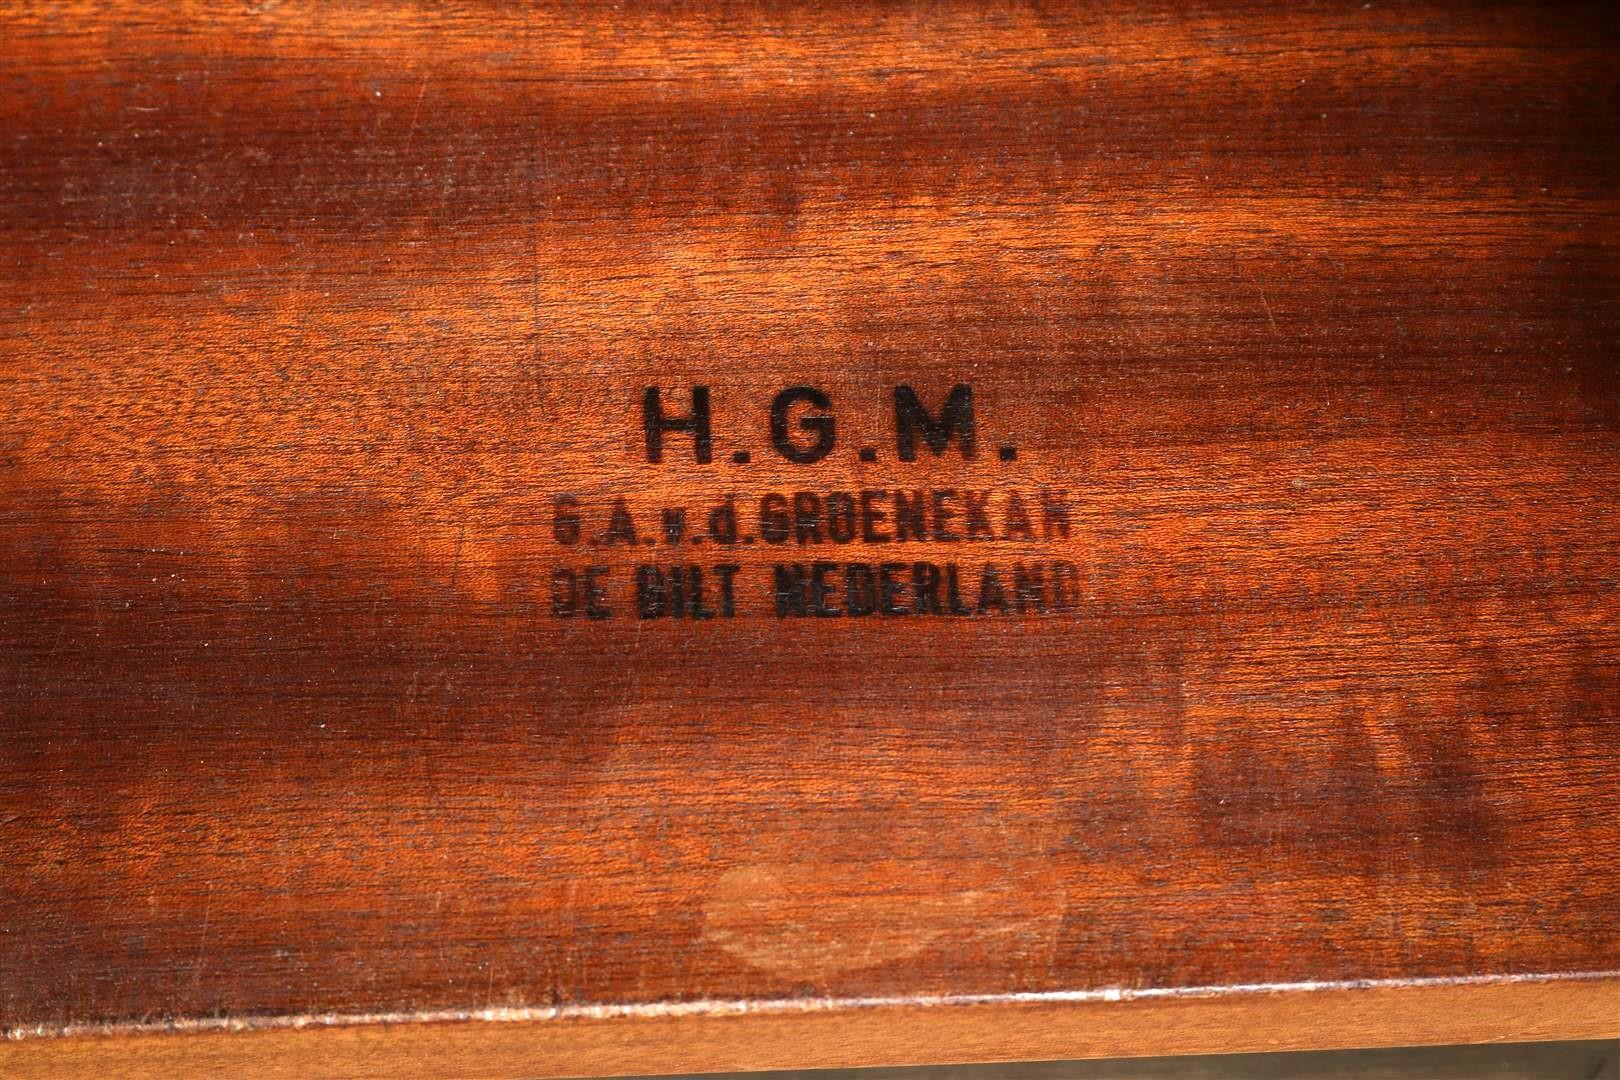 Lot of a teak tea furniture with 2 sliding glass doors and 2 panel doors, stamped H.G.M. - Image 6 of 6